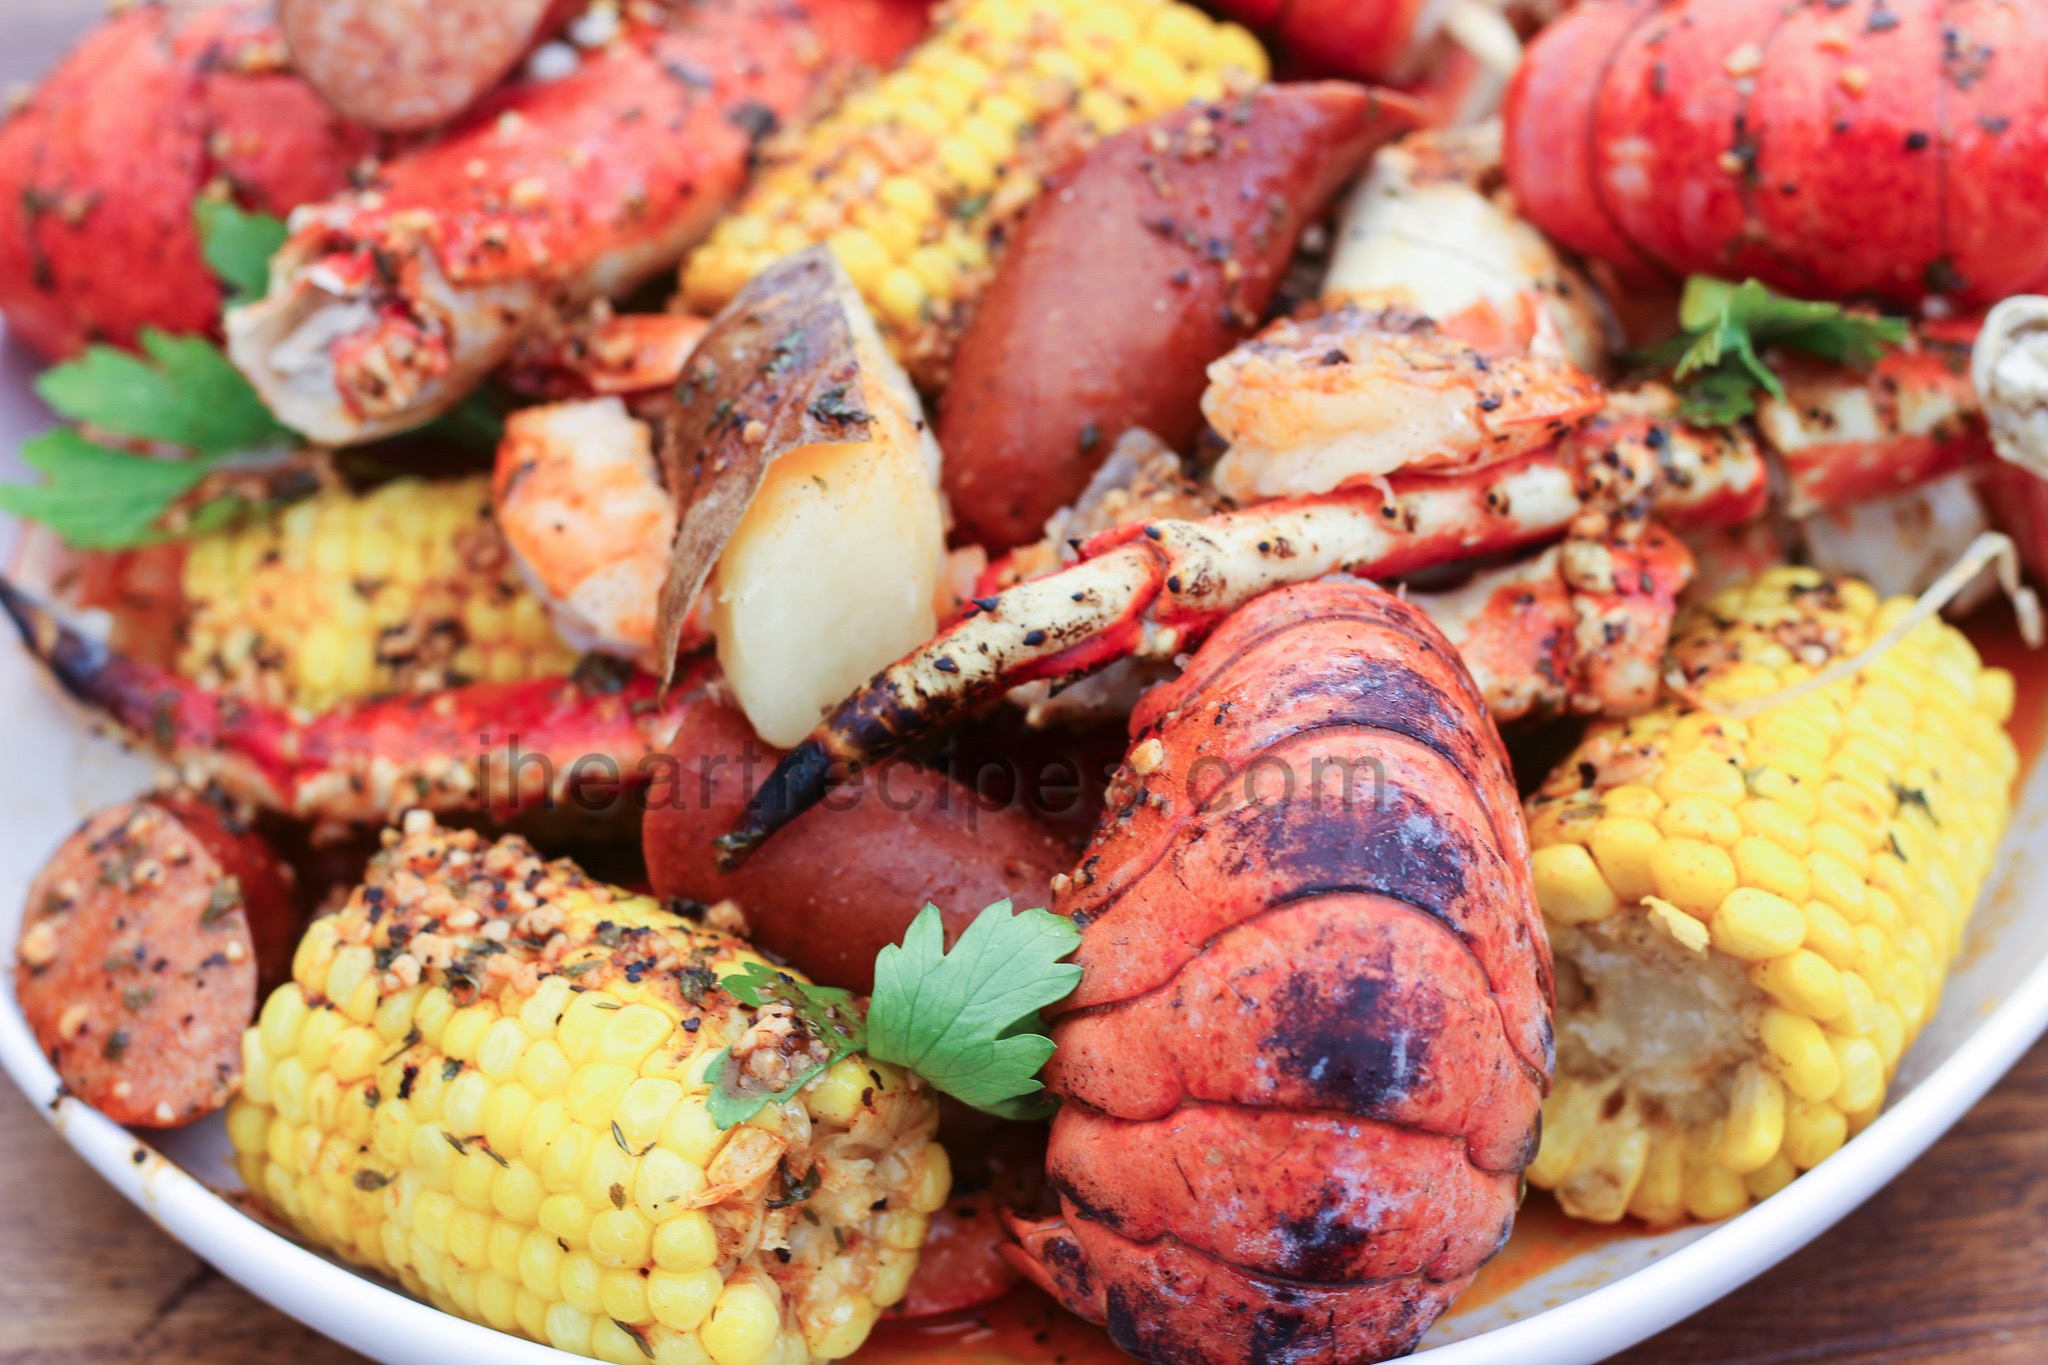 A seafood boil made with corn, potatoes, lobster tails, crab legs, sausage, and shrimp served on a large white platter.